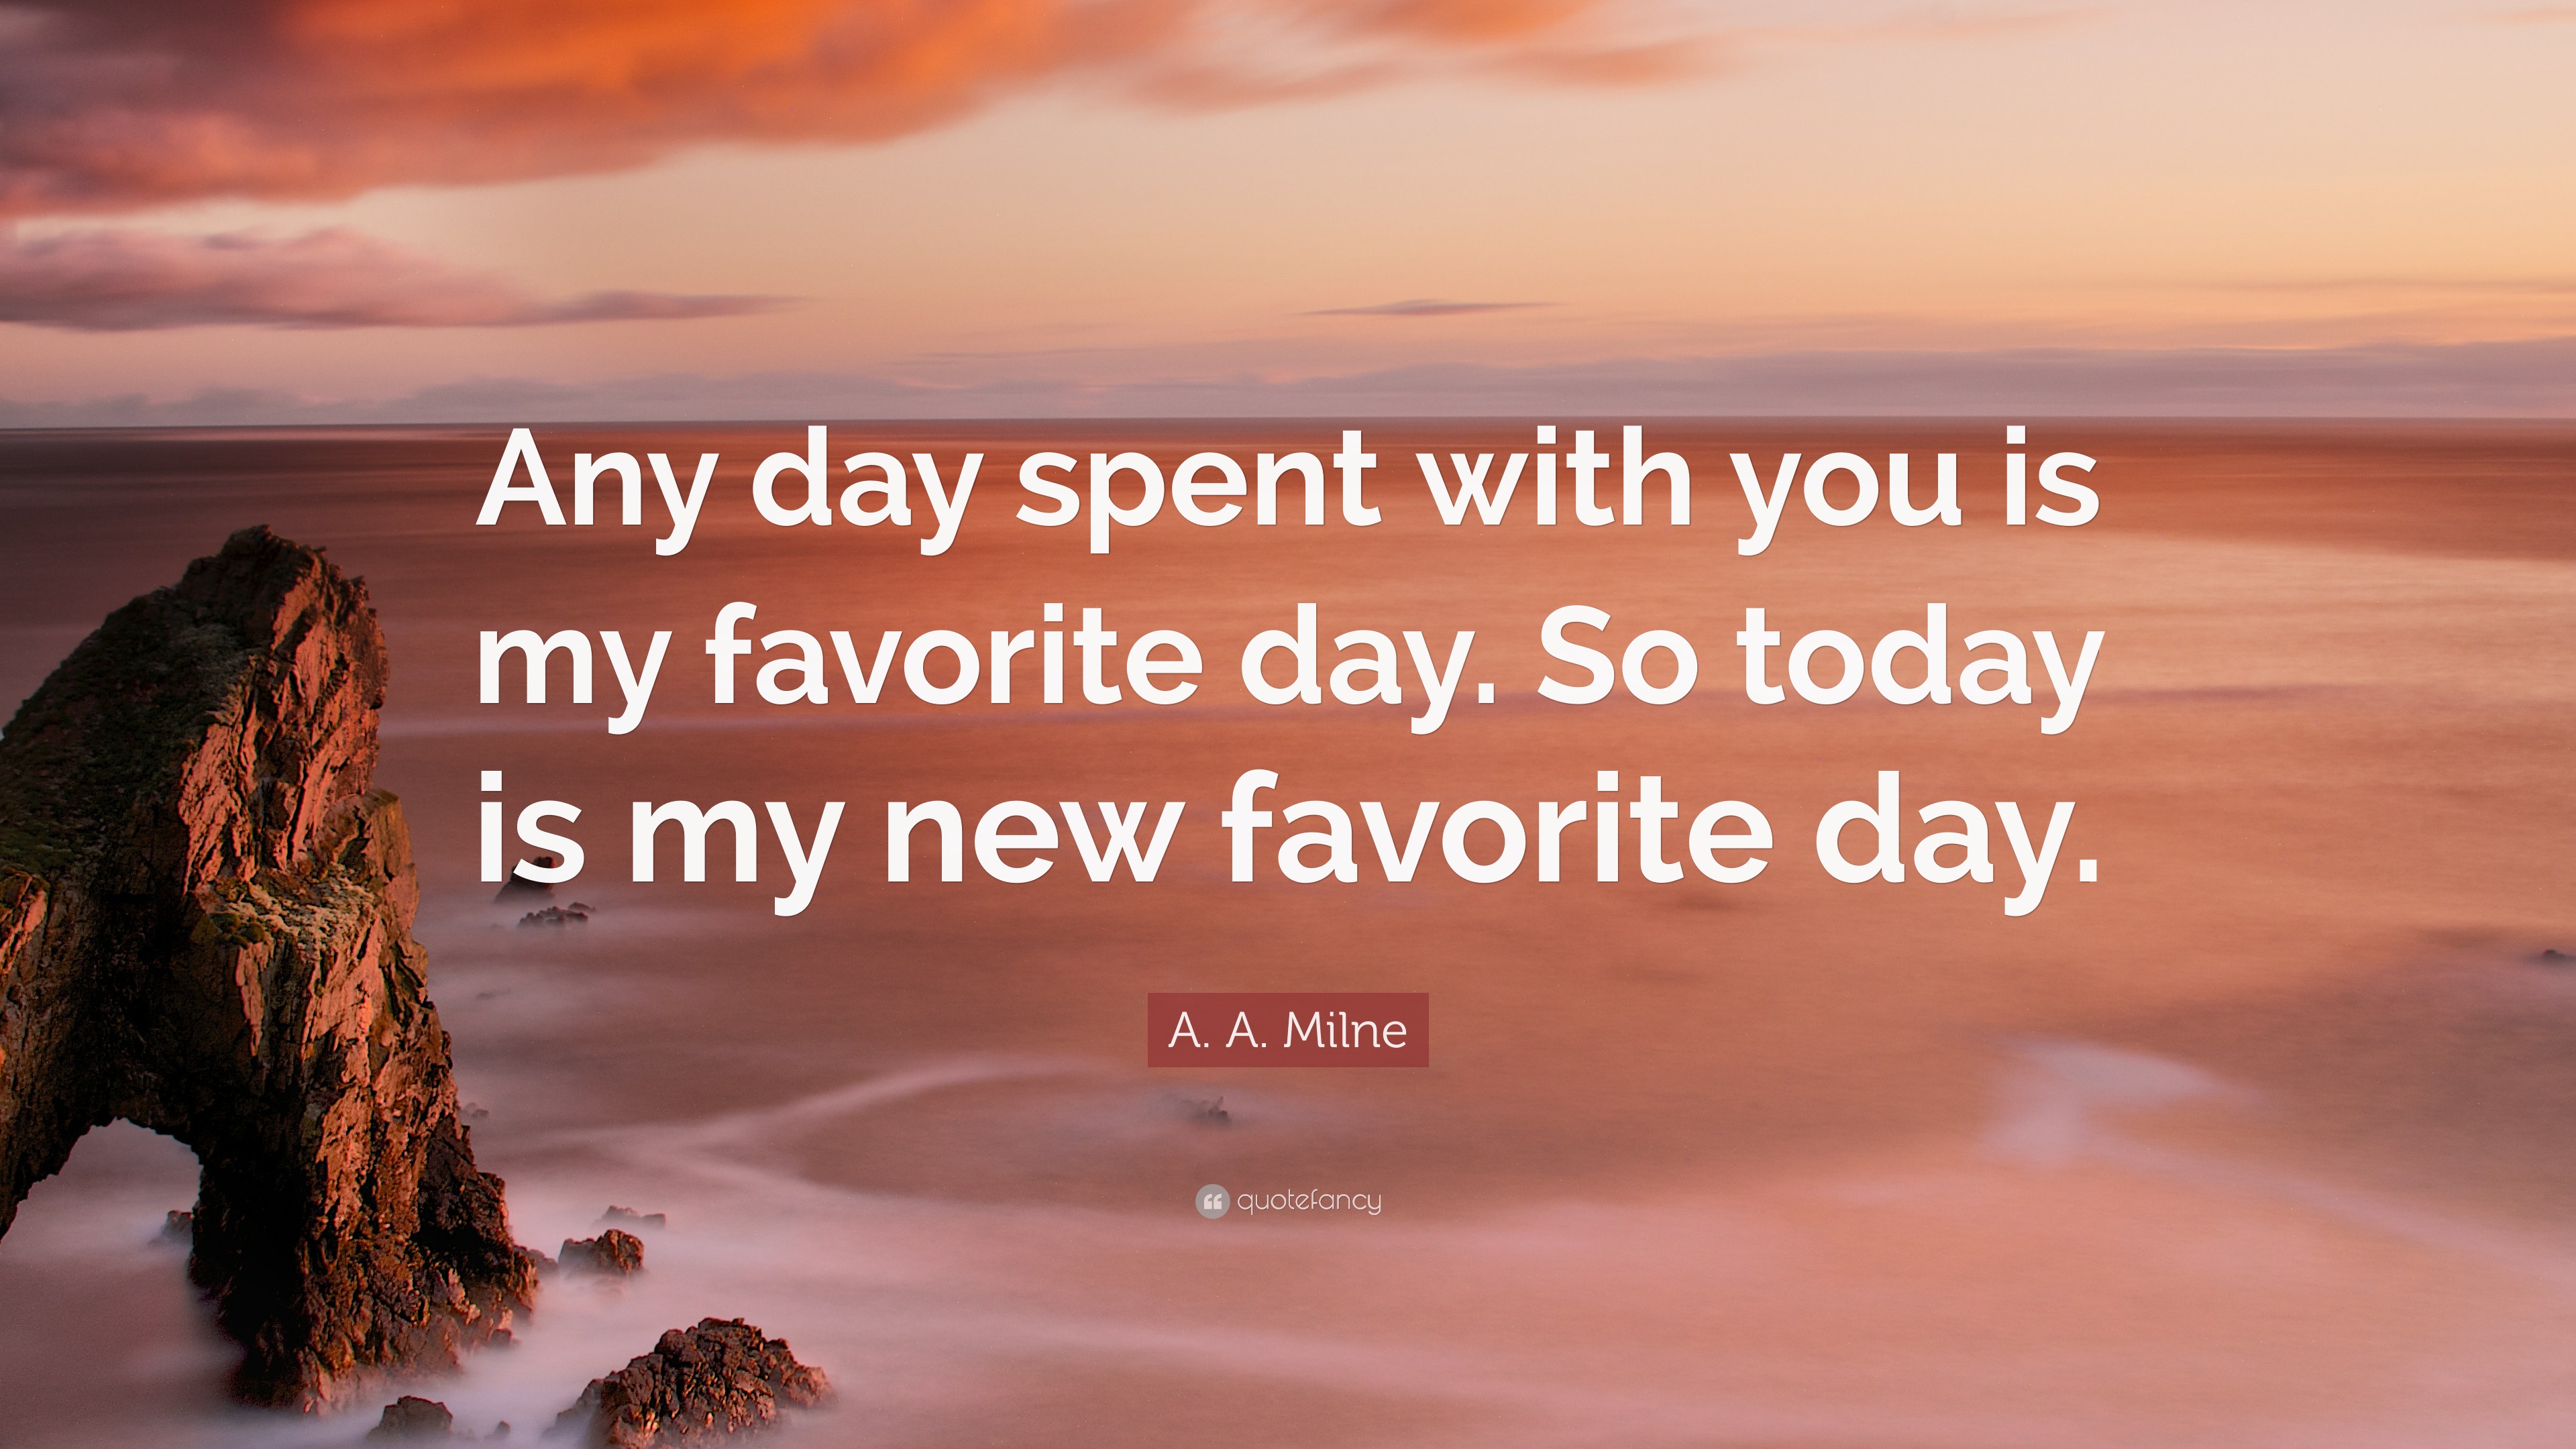 A A Milne Quote “any Day Spent With You Is My Favorite Day So Today Is My New Favorite Day” 4747